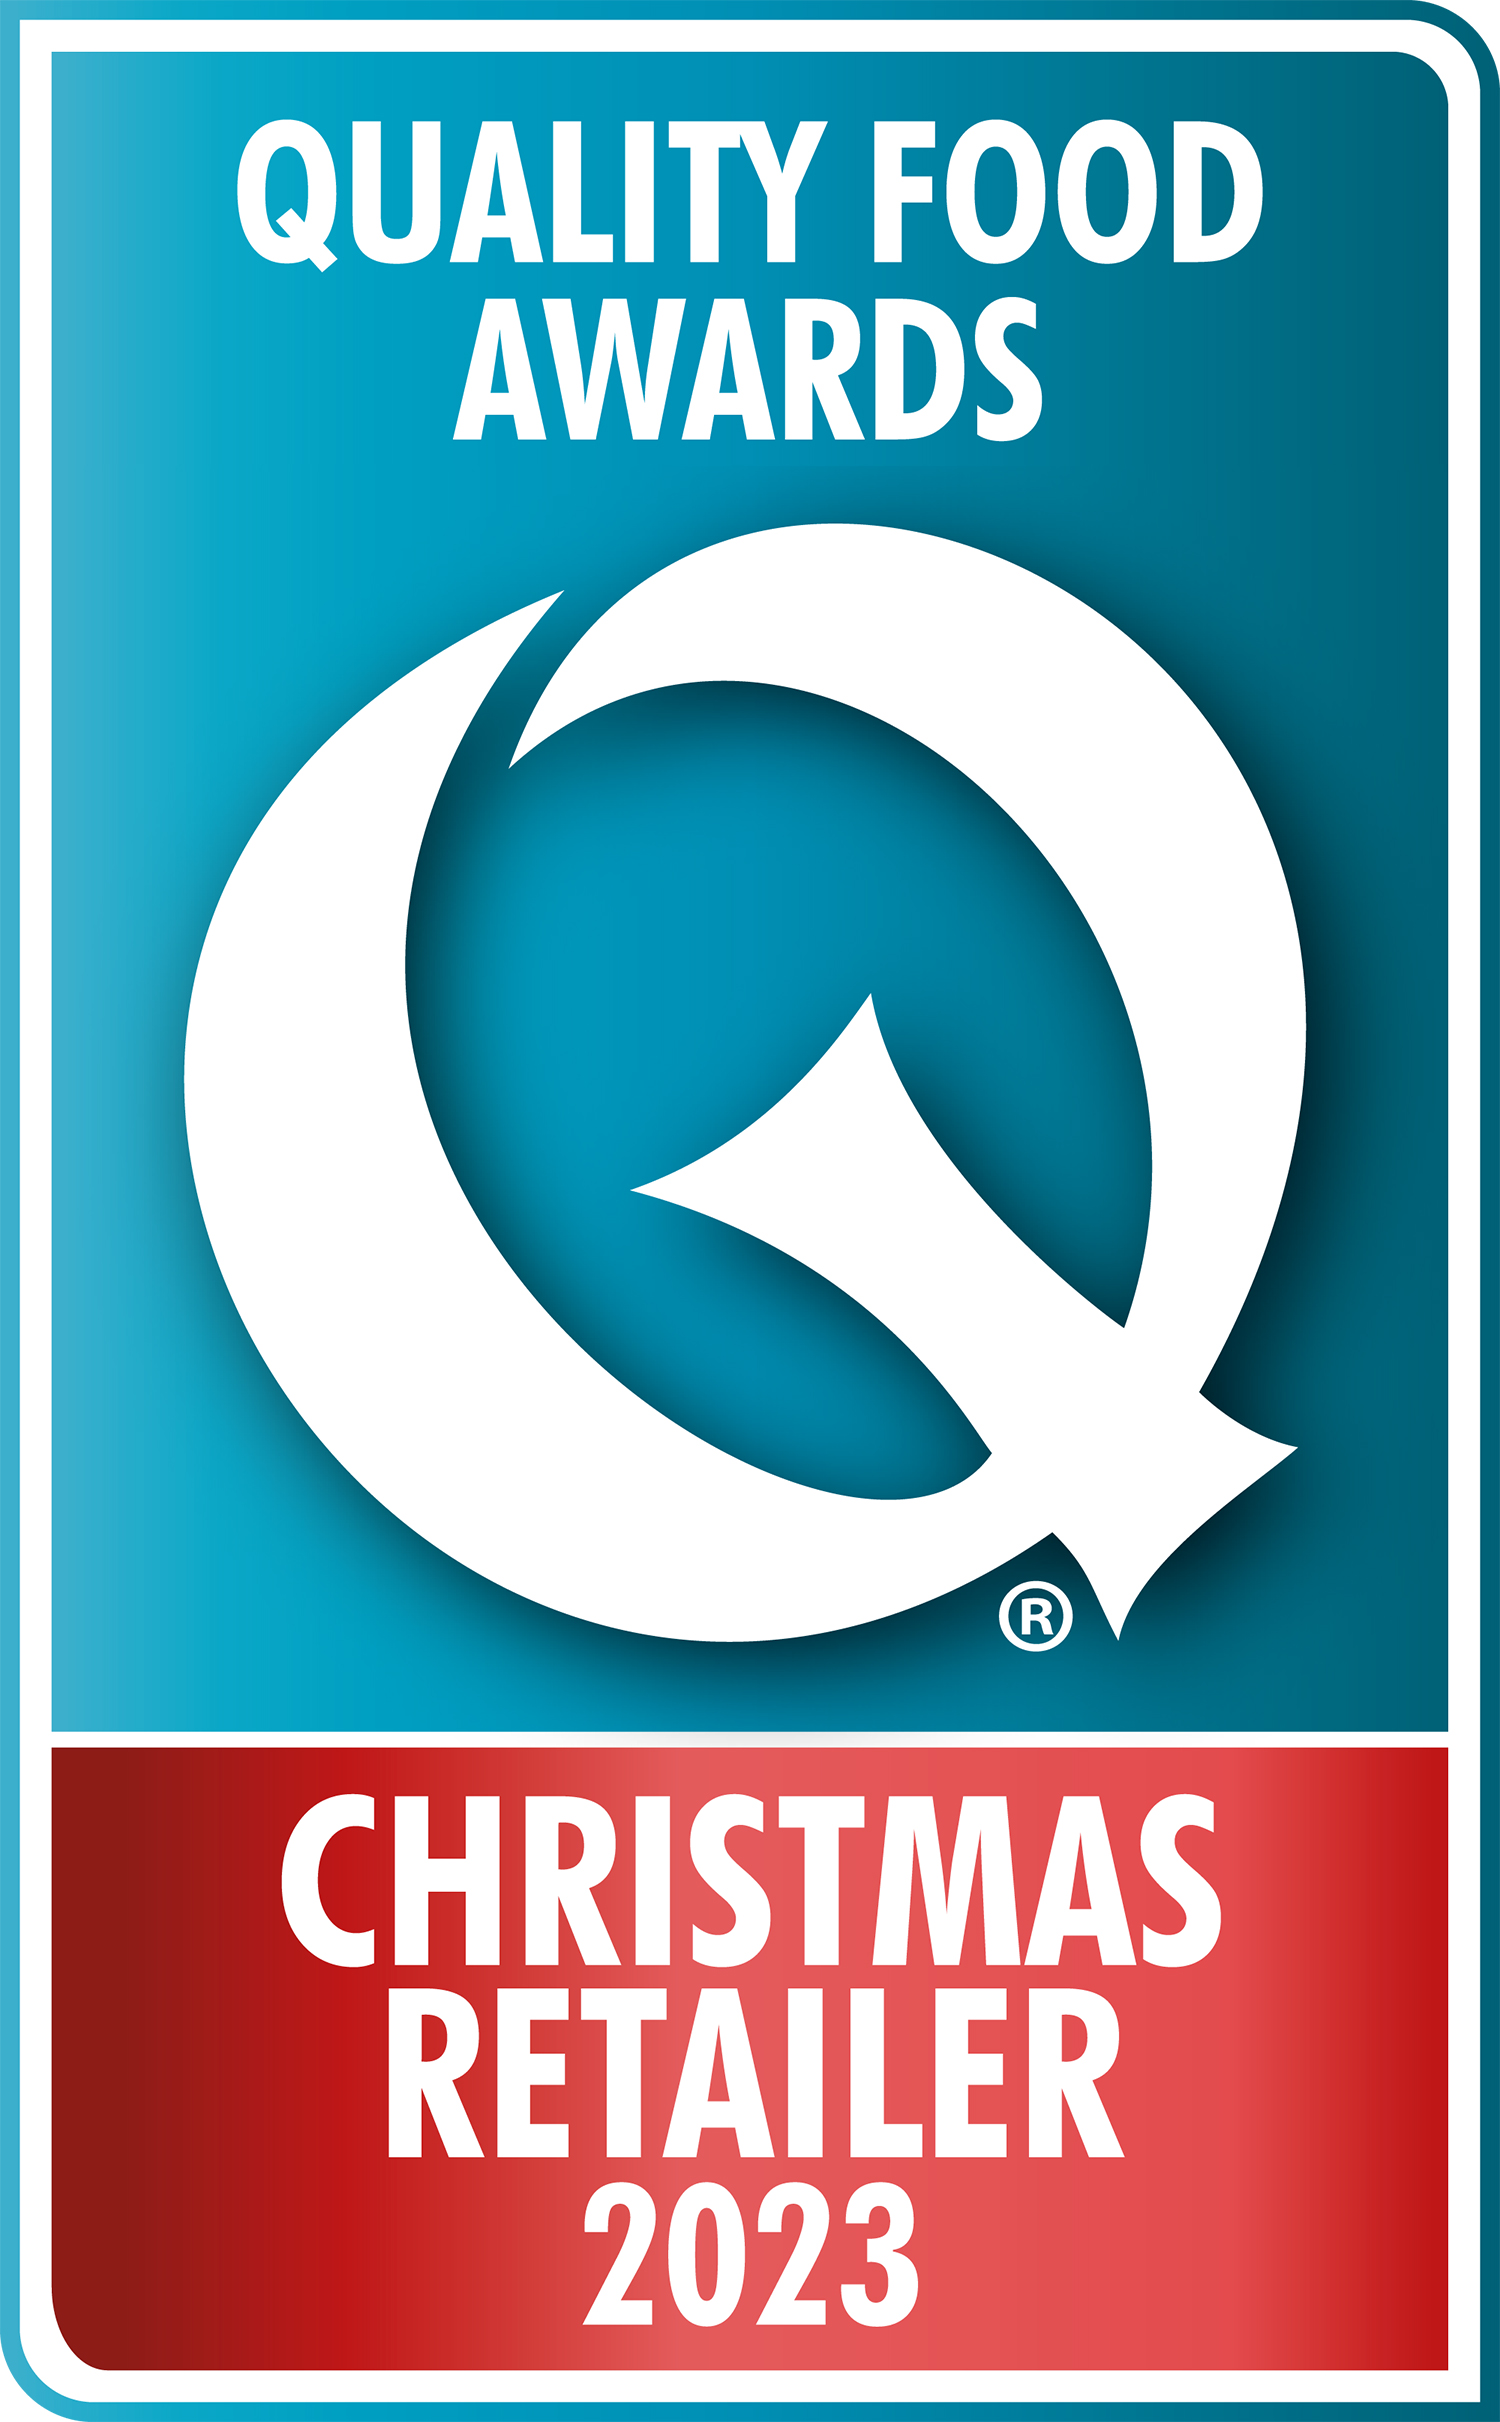 Quality Food Awards Christmas Retailer of the Year 2023